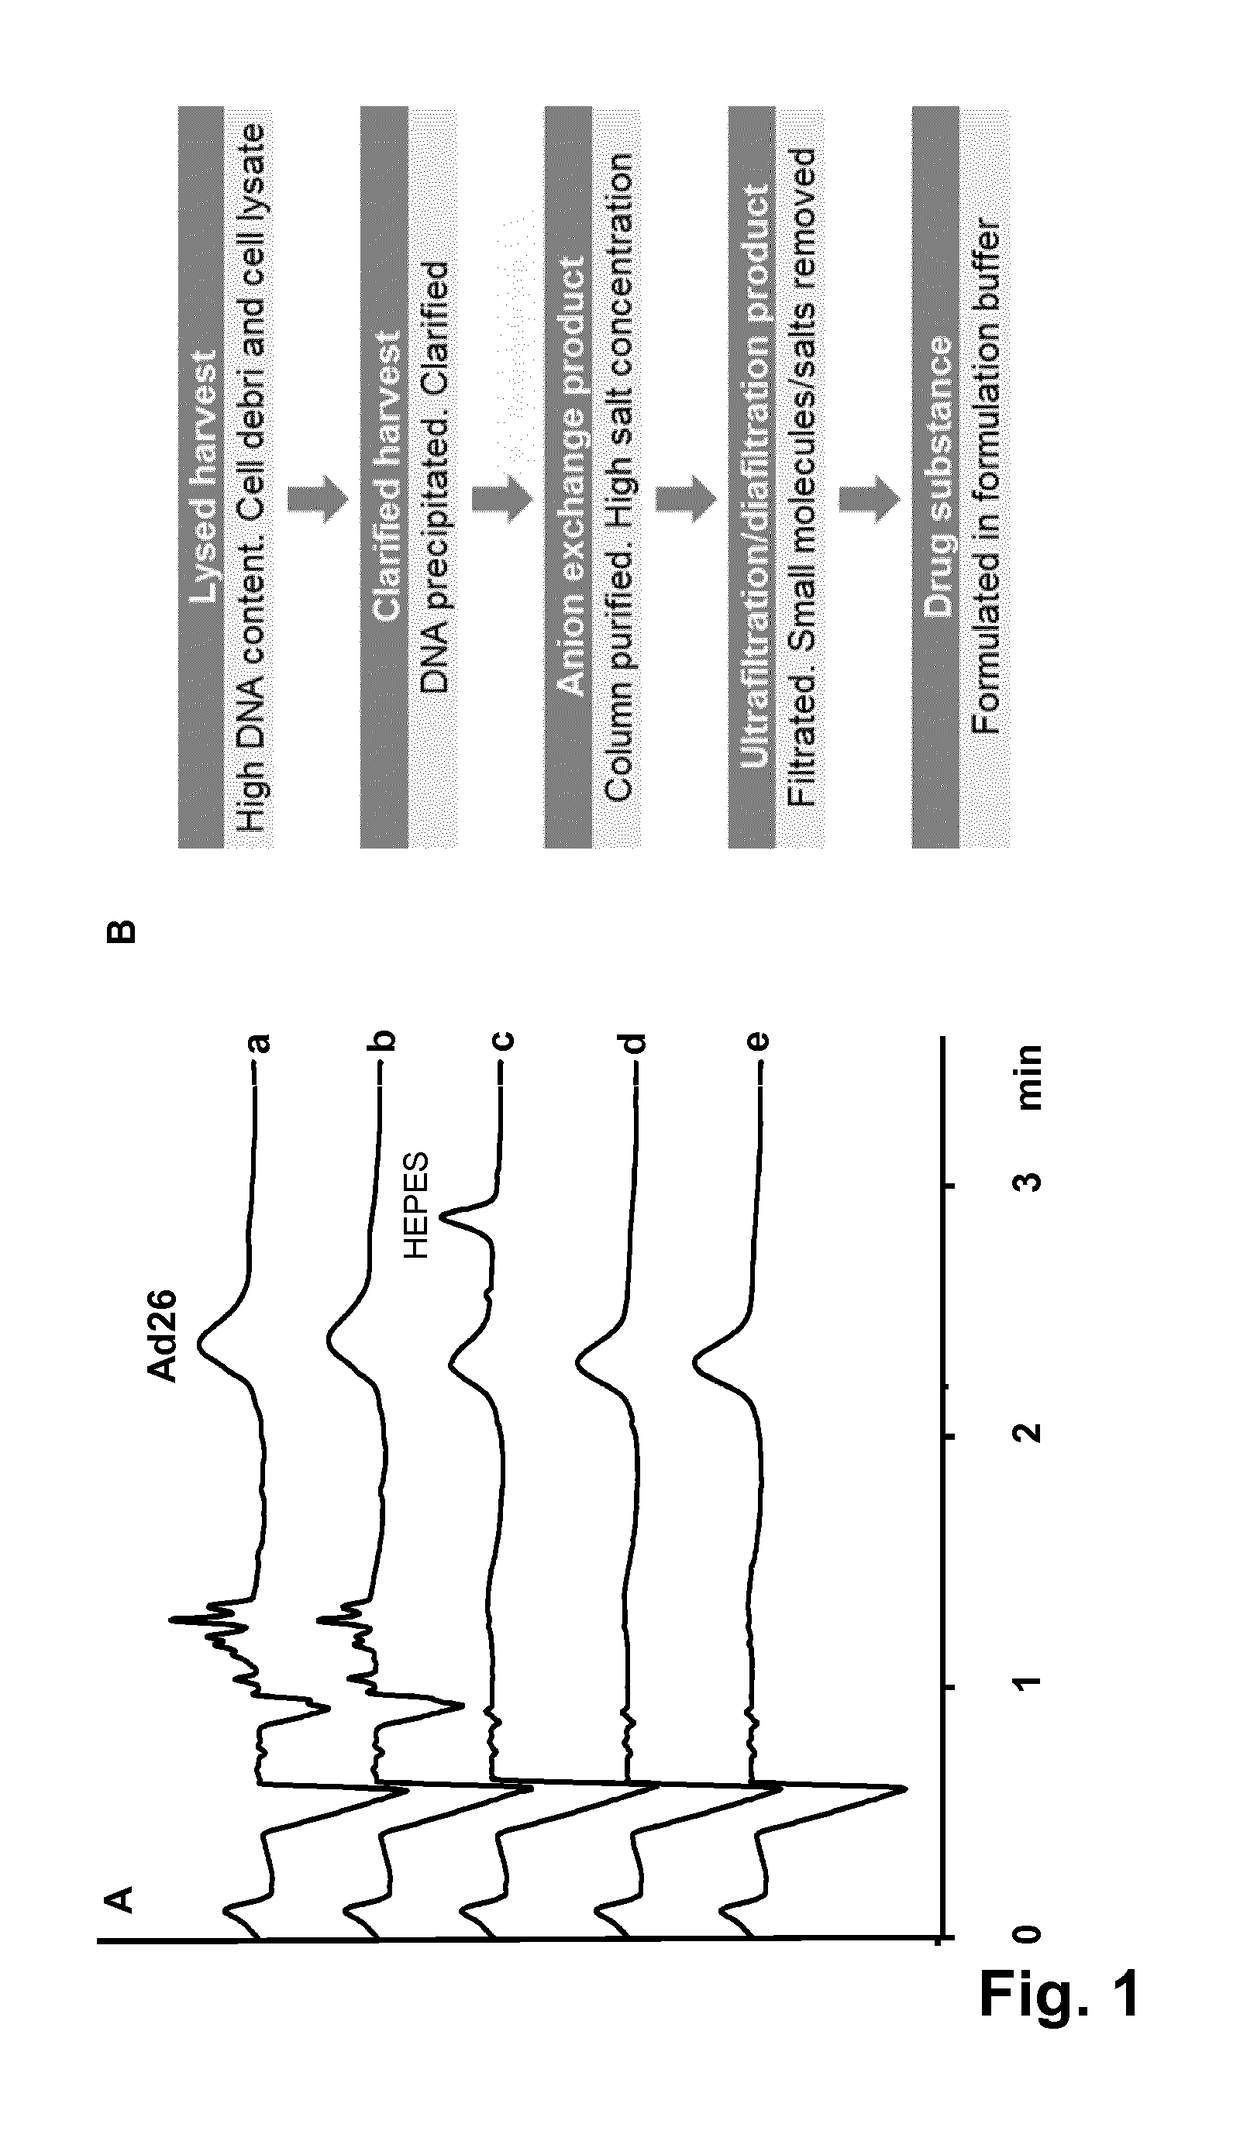 Method for quantification of virus particles using capillary zone electrophoresis